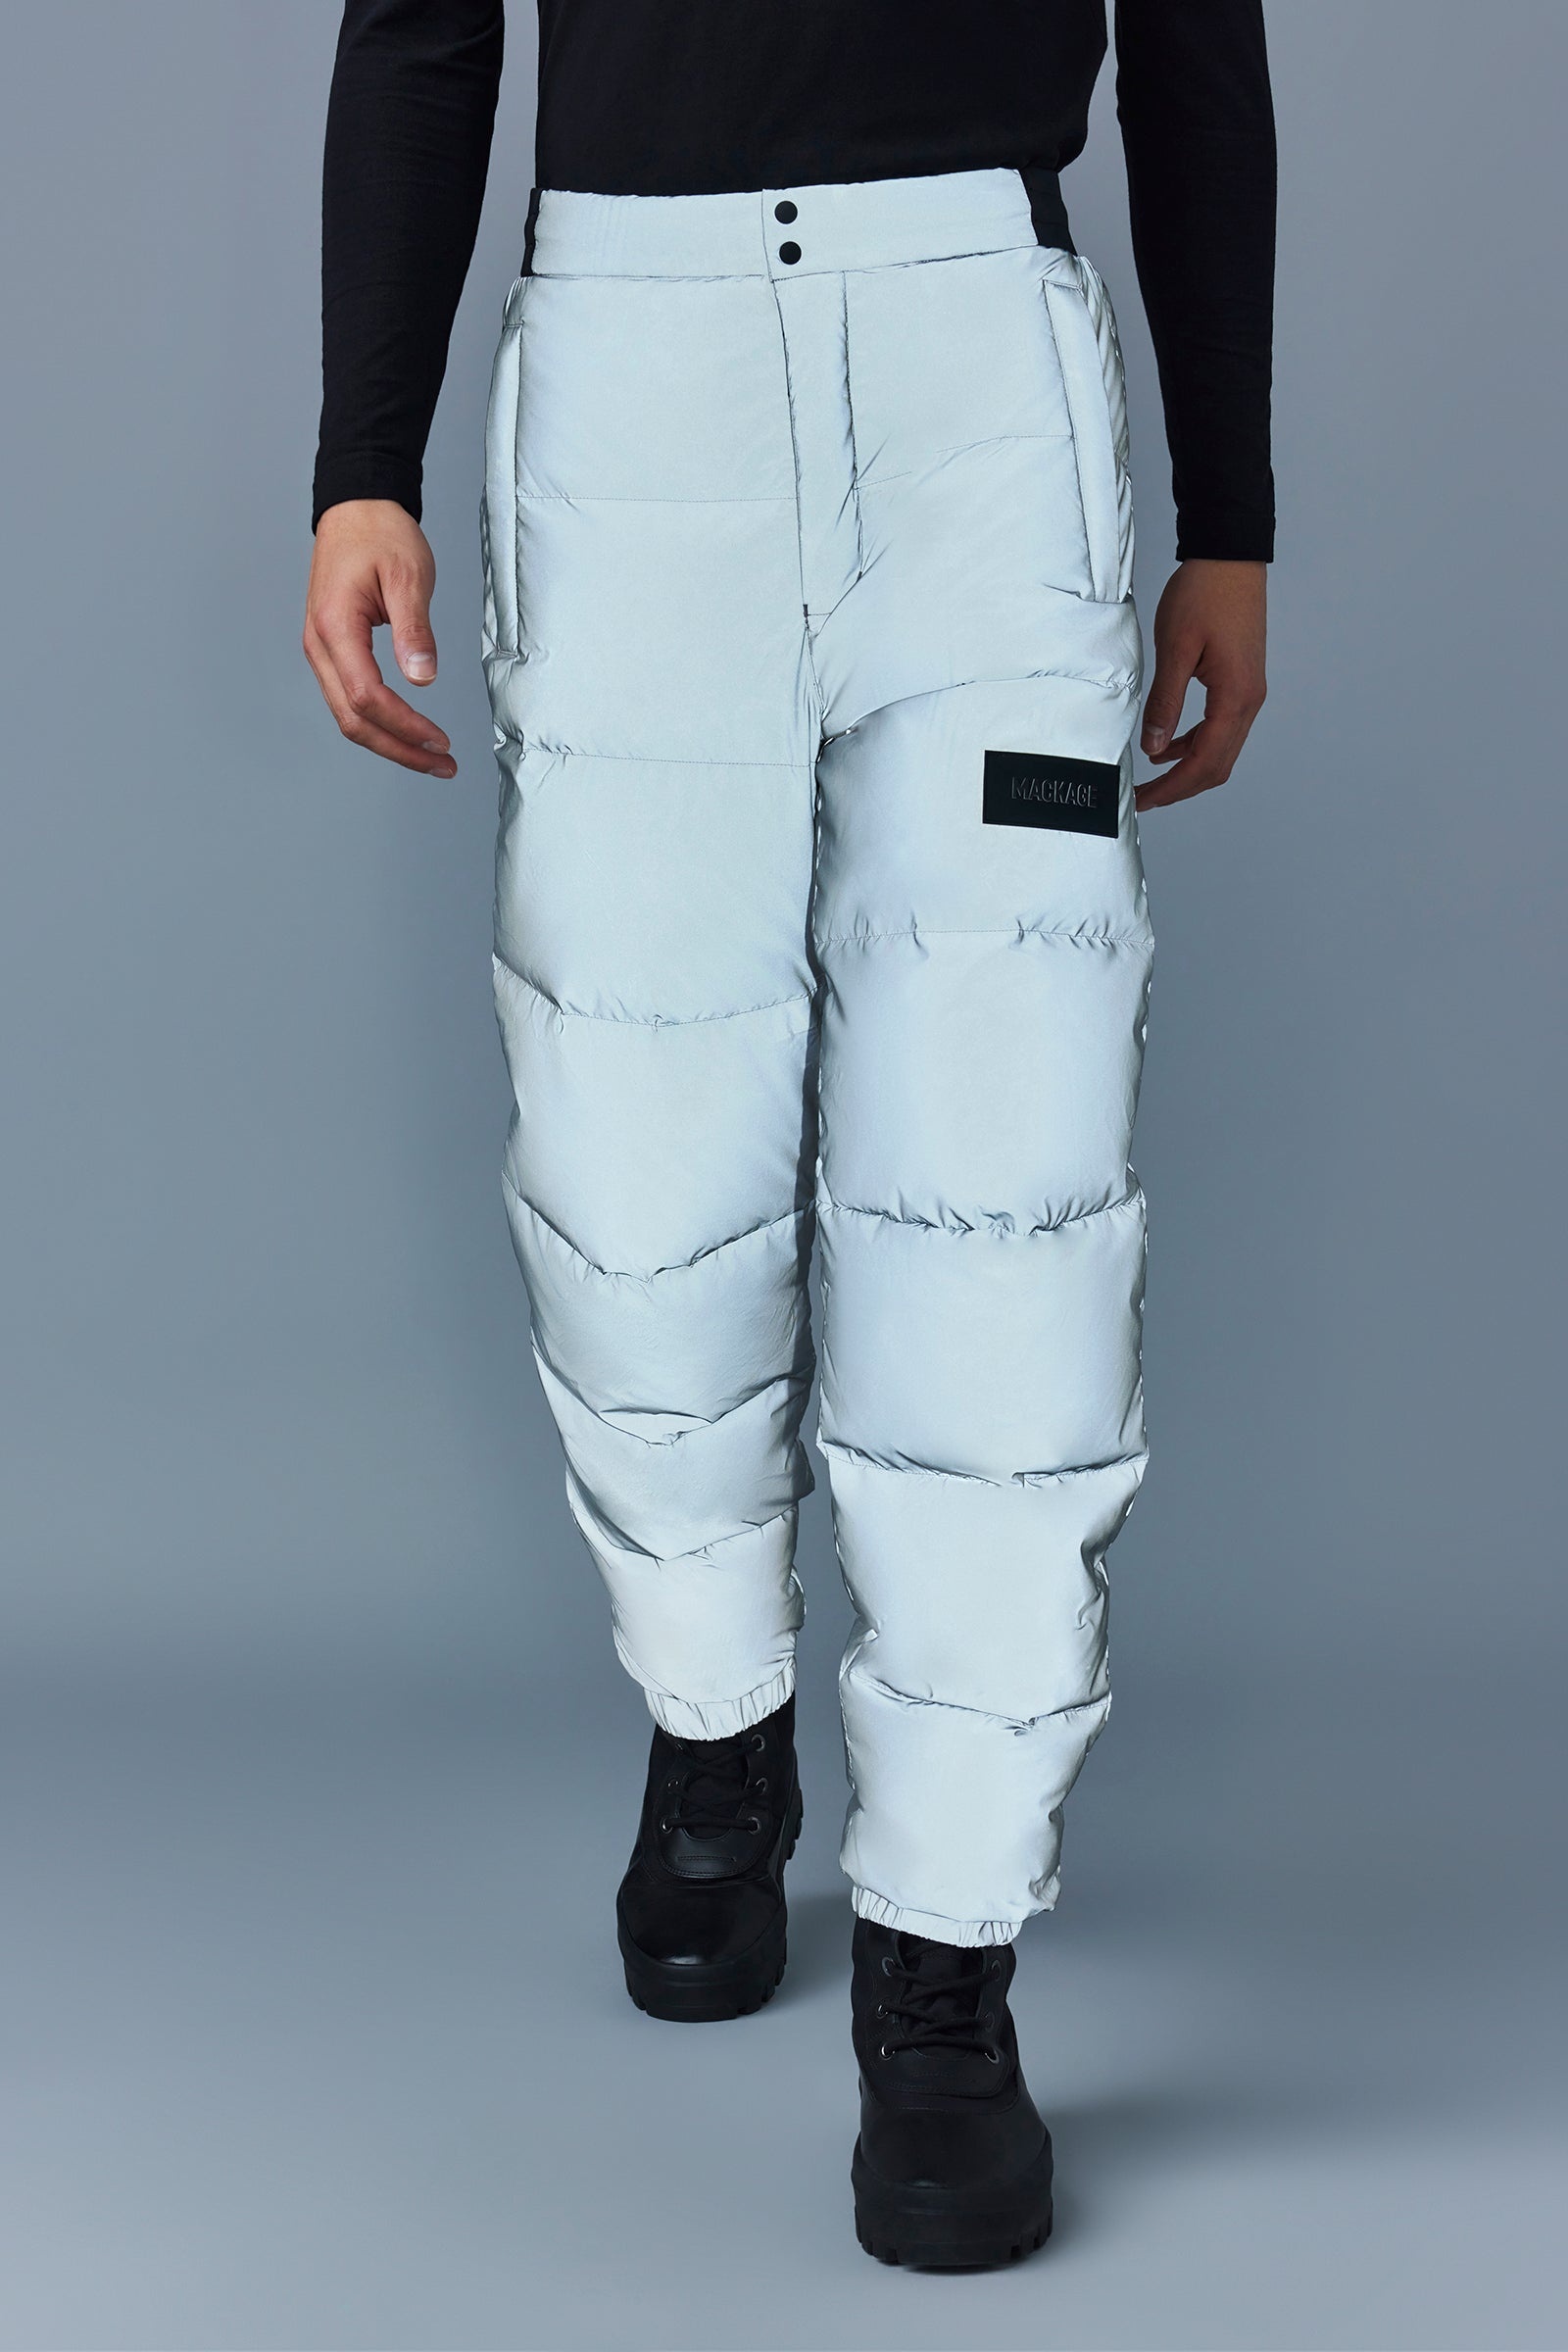 NELSON-RF Reflective down quilted ski pants - 7